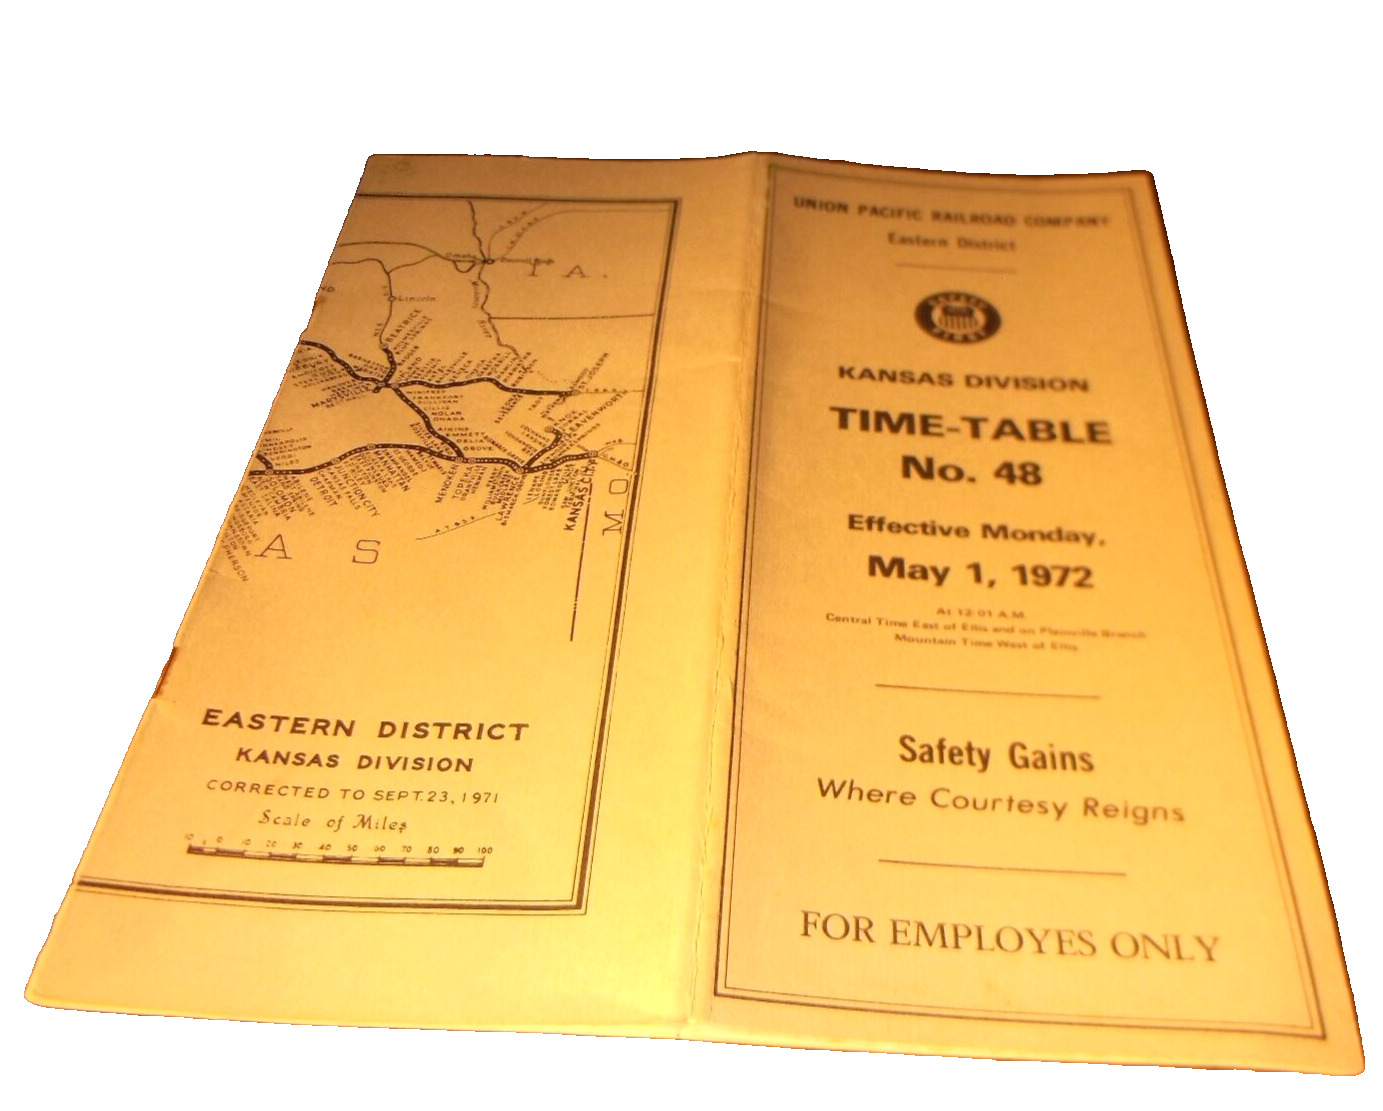 MAY 1972 UNION PACIFIC KANSAS DIVISION EMPLOYEE TIMETABLE #48